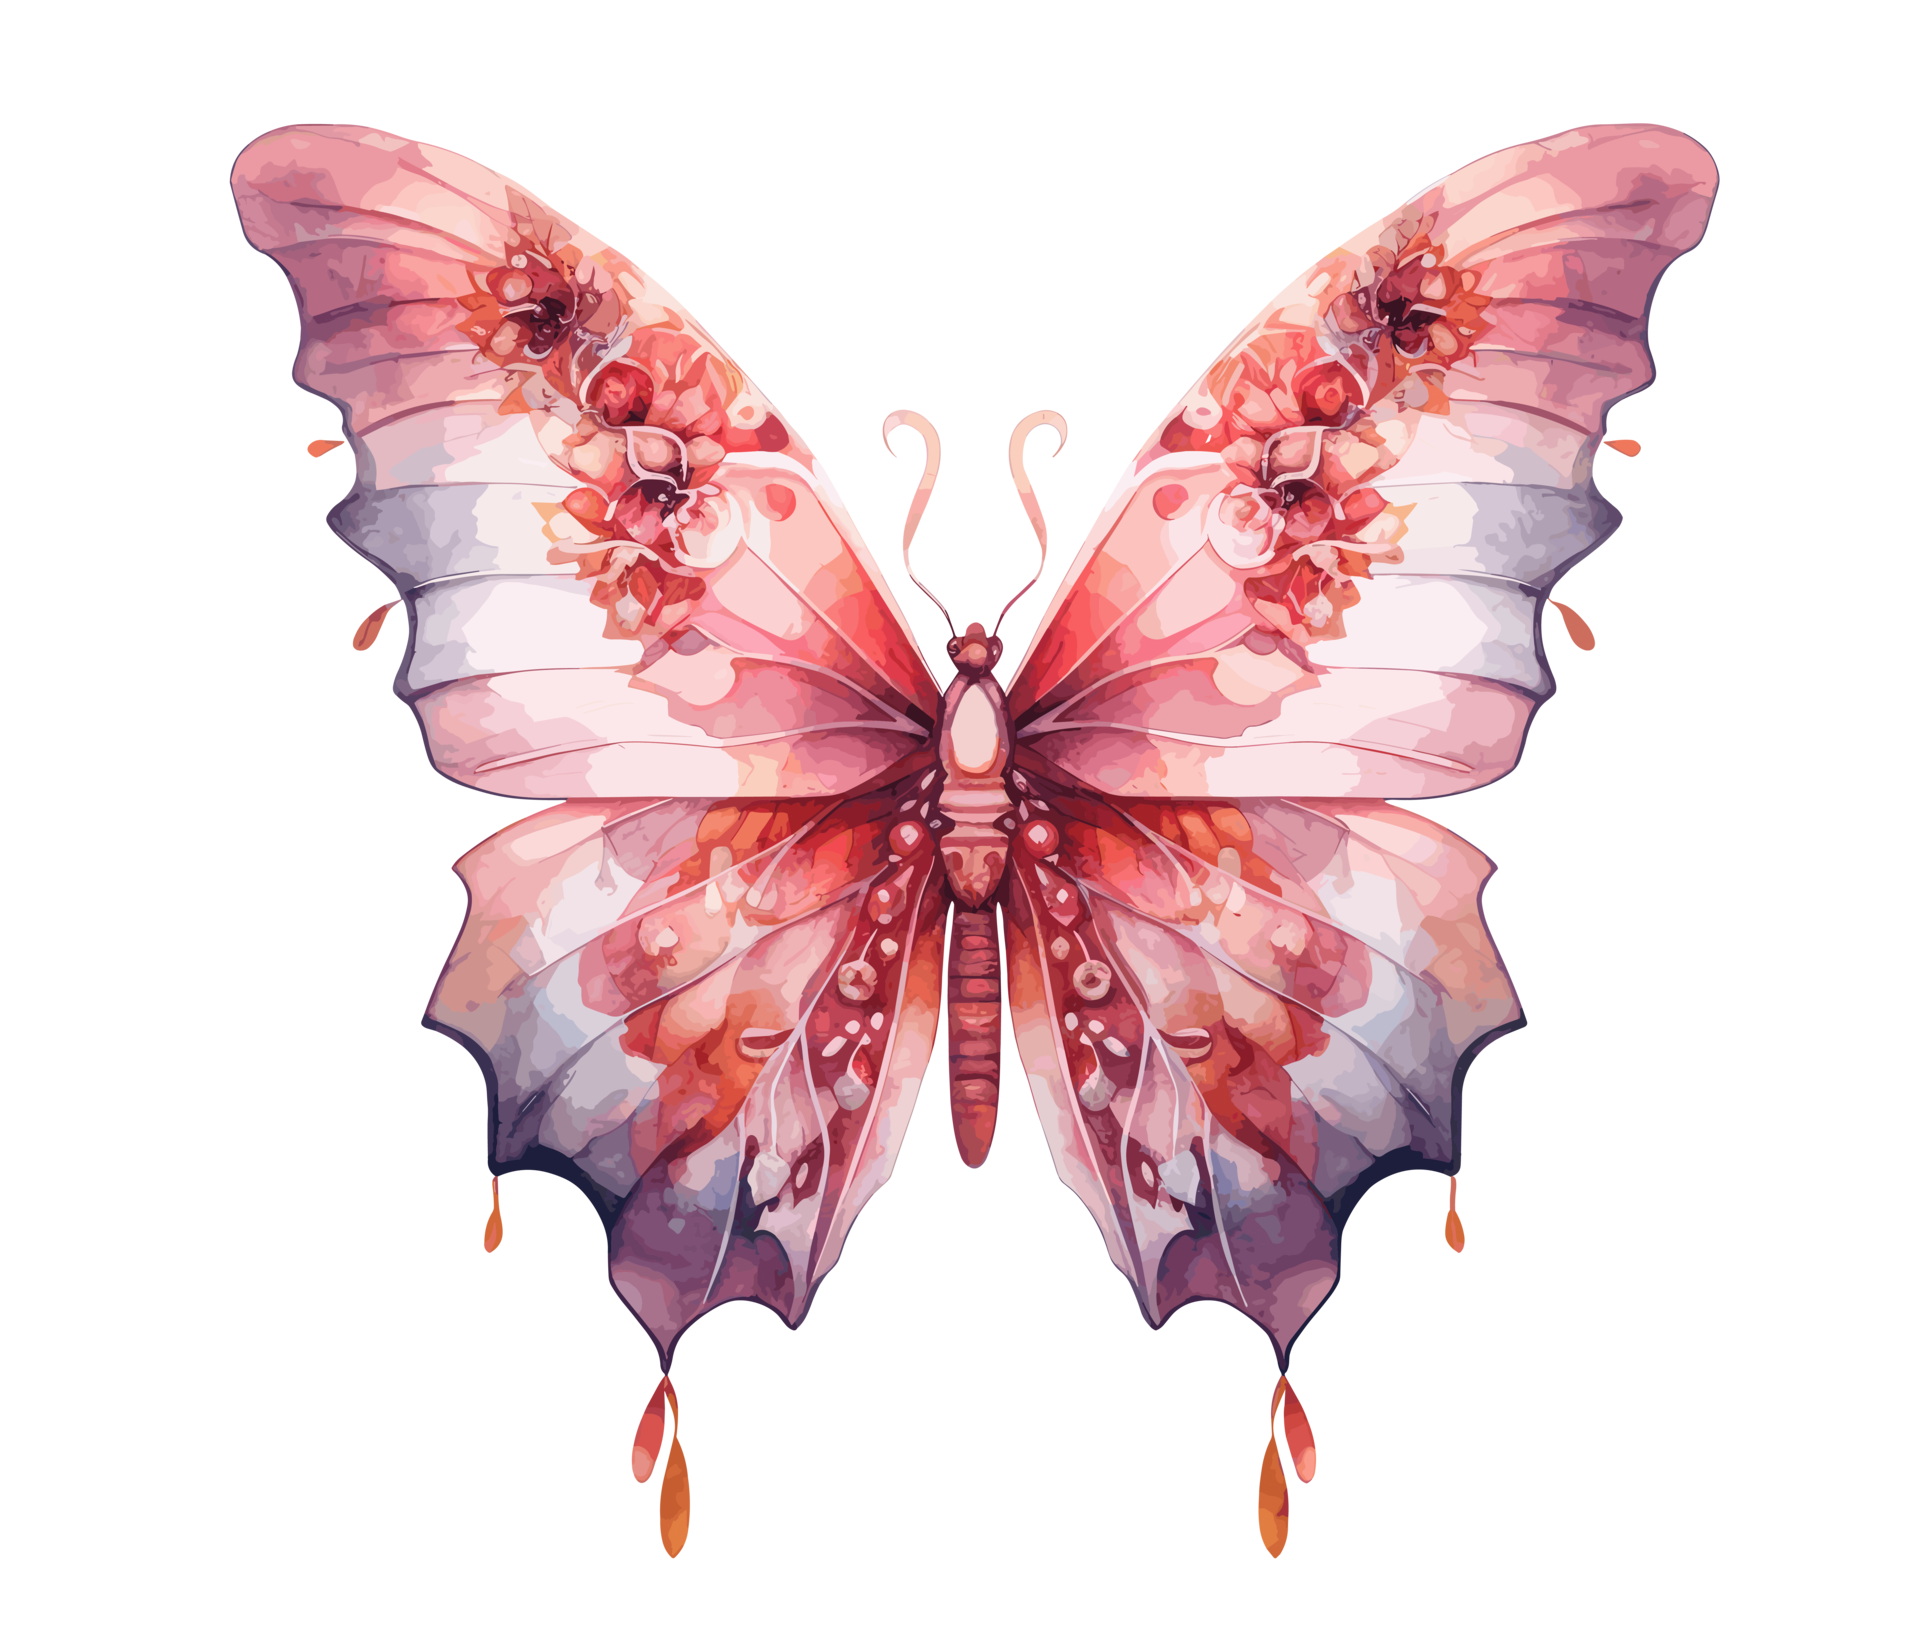 Watercolor colorful butterflies, isolated on transparent